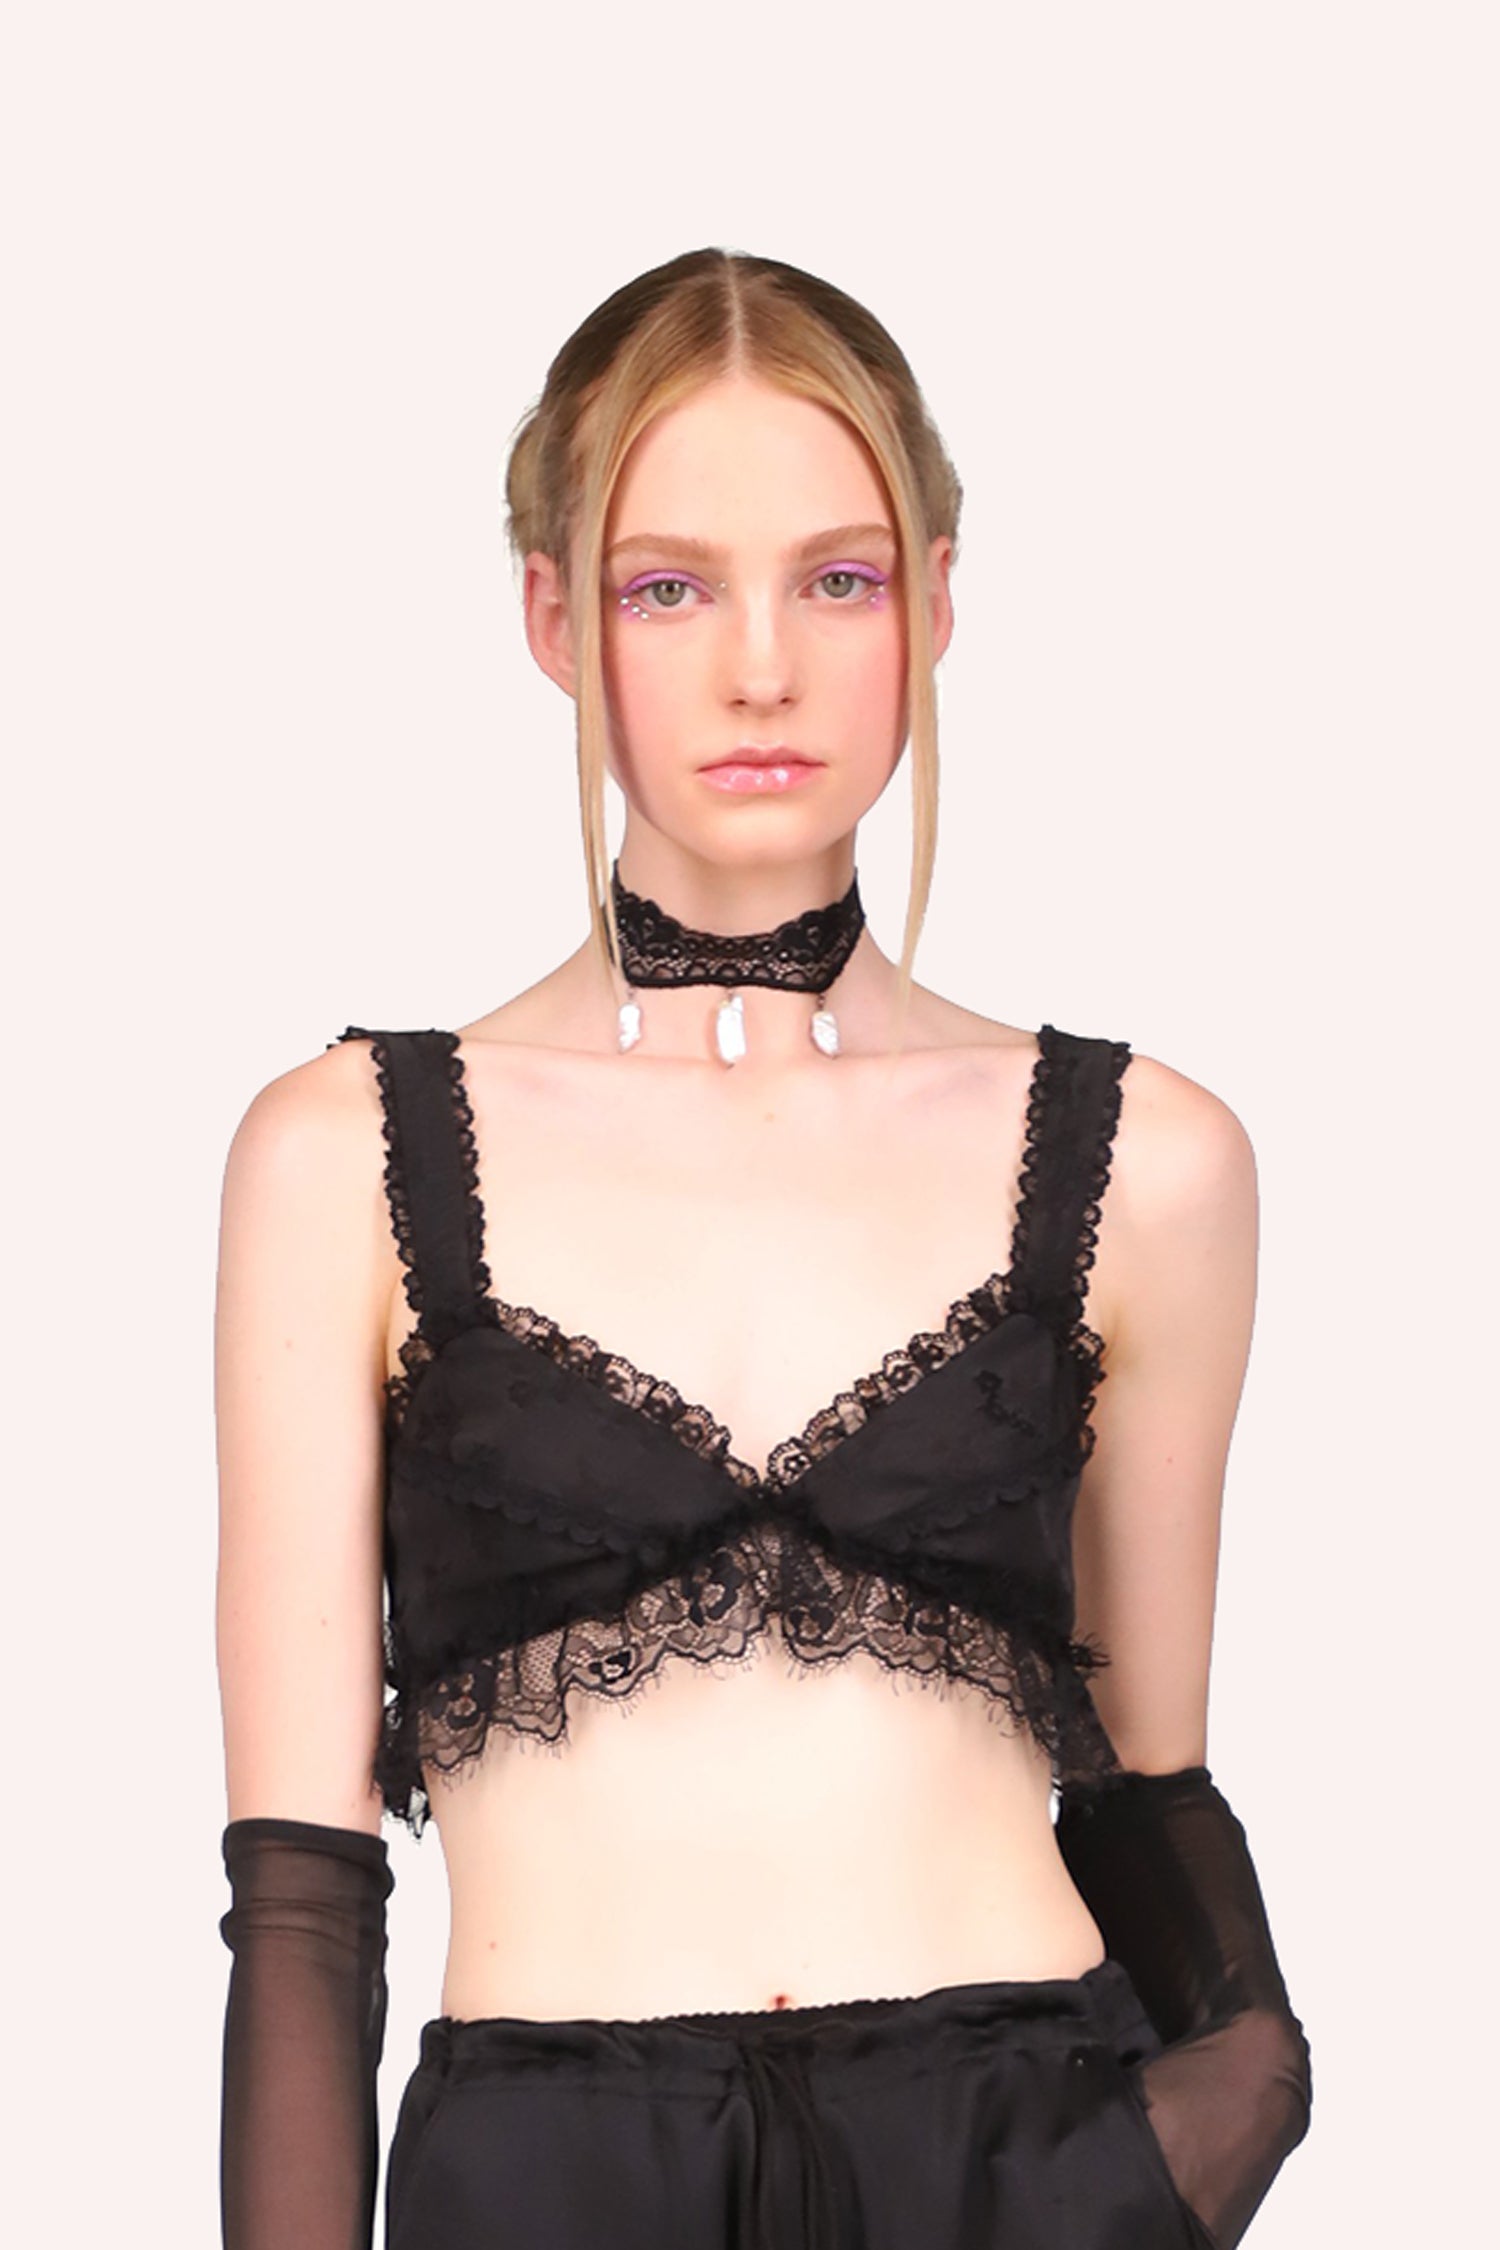 "Floral Jacquard Bralette" is a black-colored bra with a large lace hem and two straps with smaller black lace.